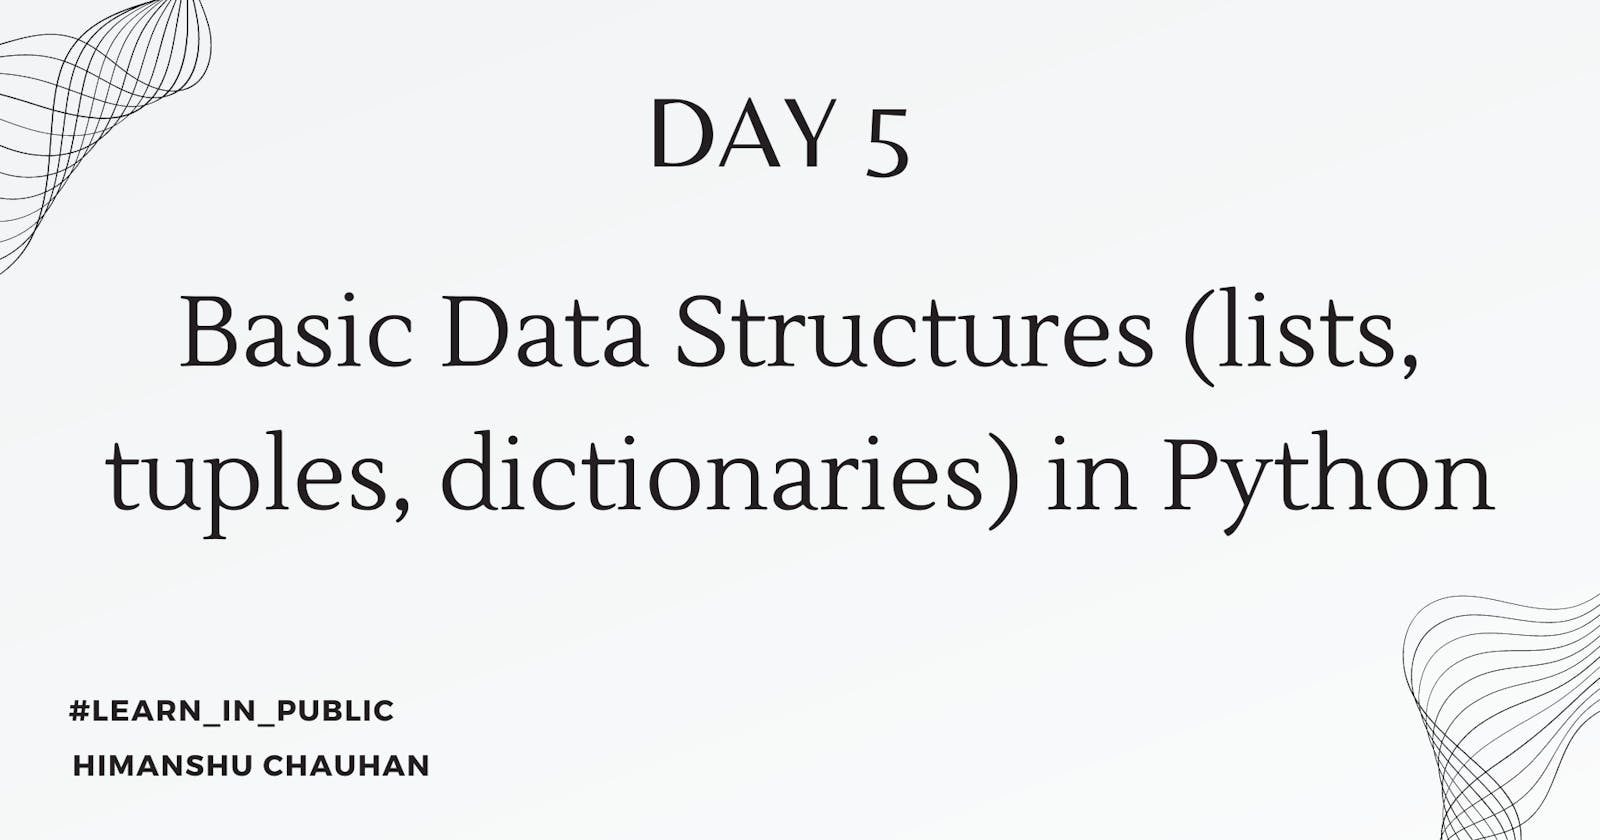 Day 5: Basic Data Structures (lists, tuples, dictionaries) in Python